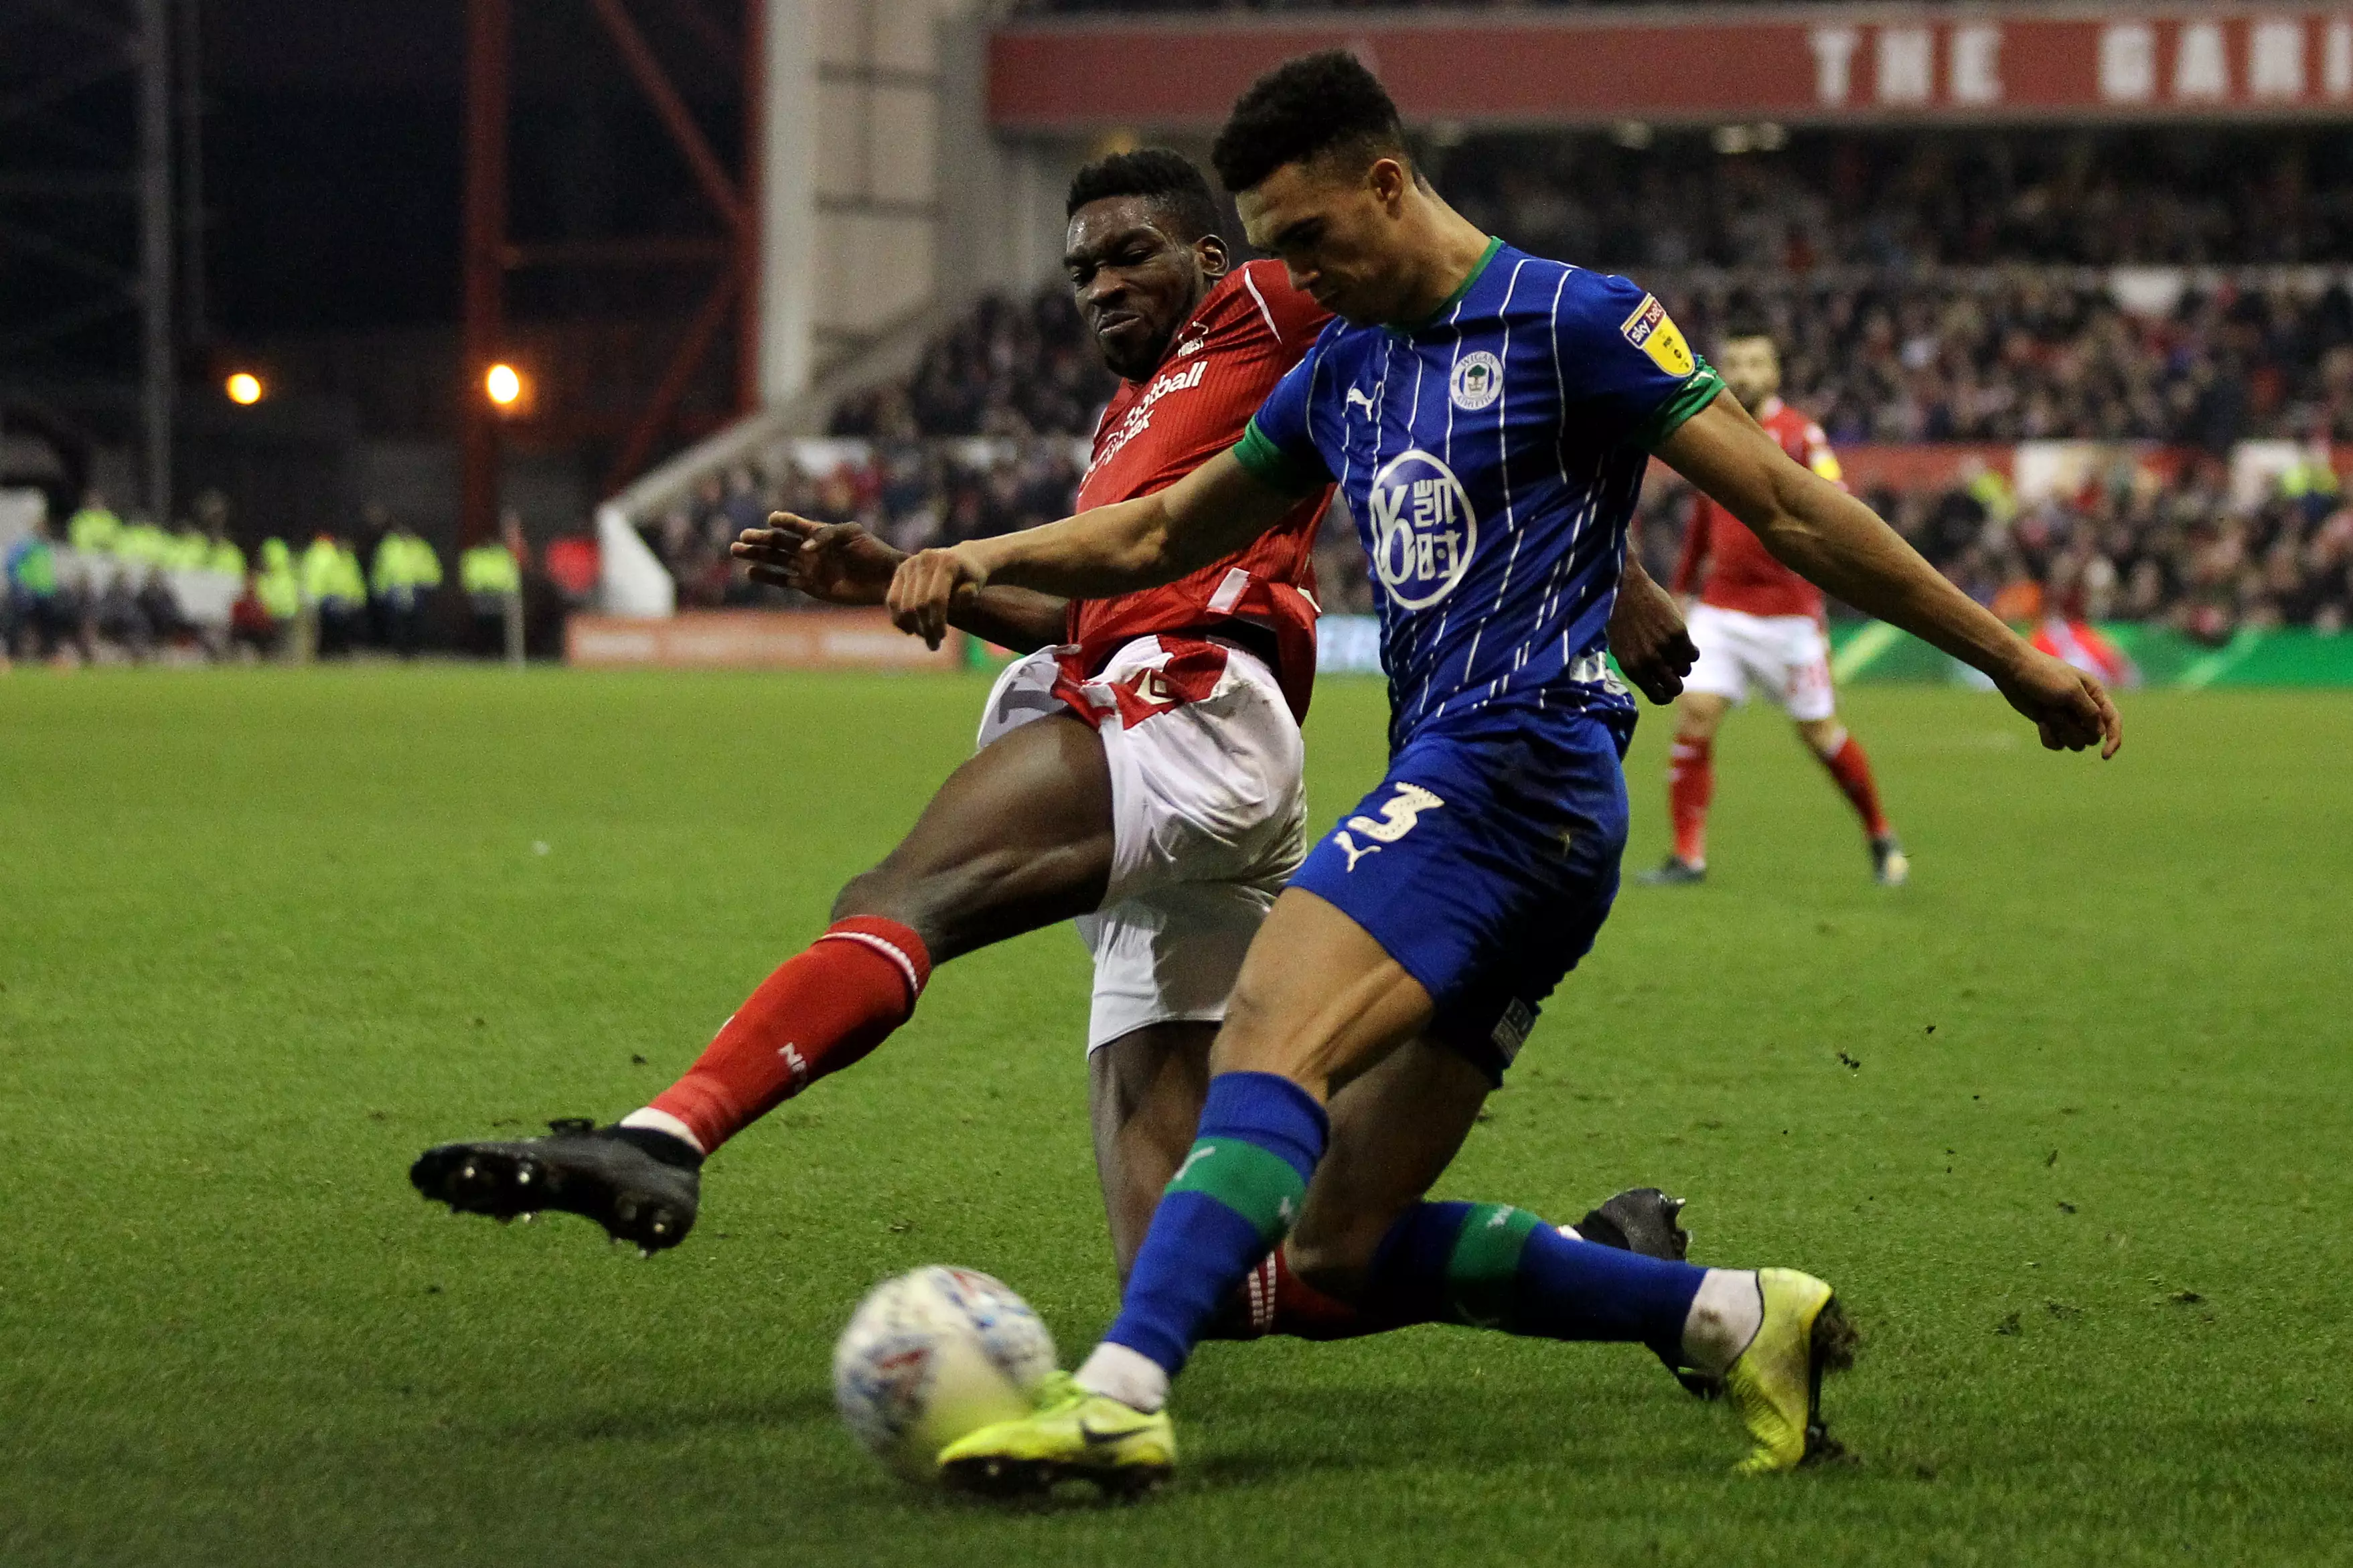 Robinson playing against Nottingham Forest in December. Image: PA Images